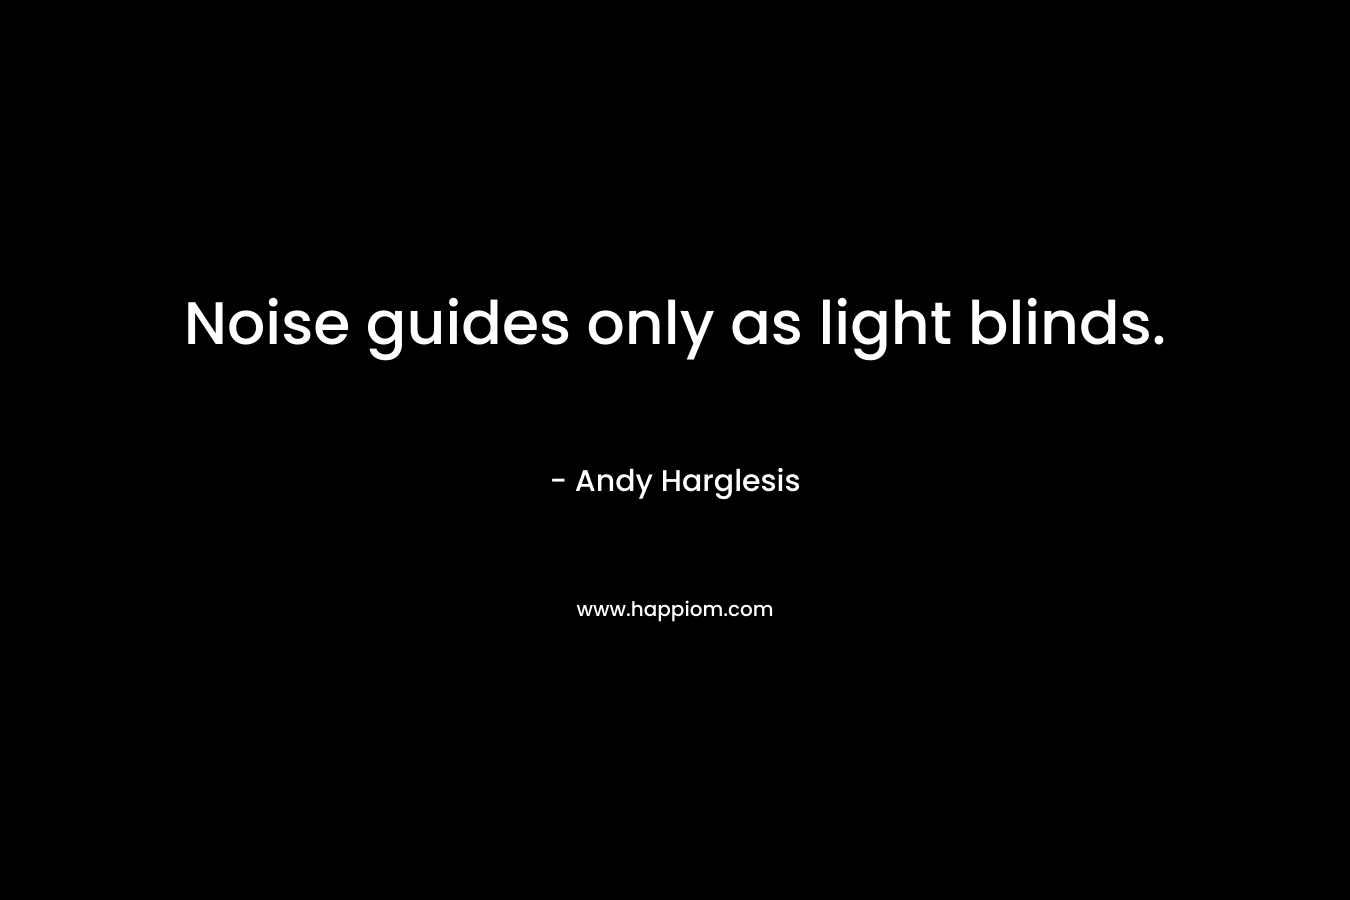 Noise guides only as light blinds.